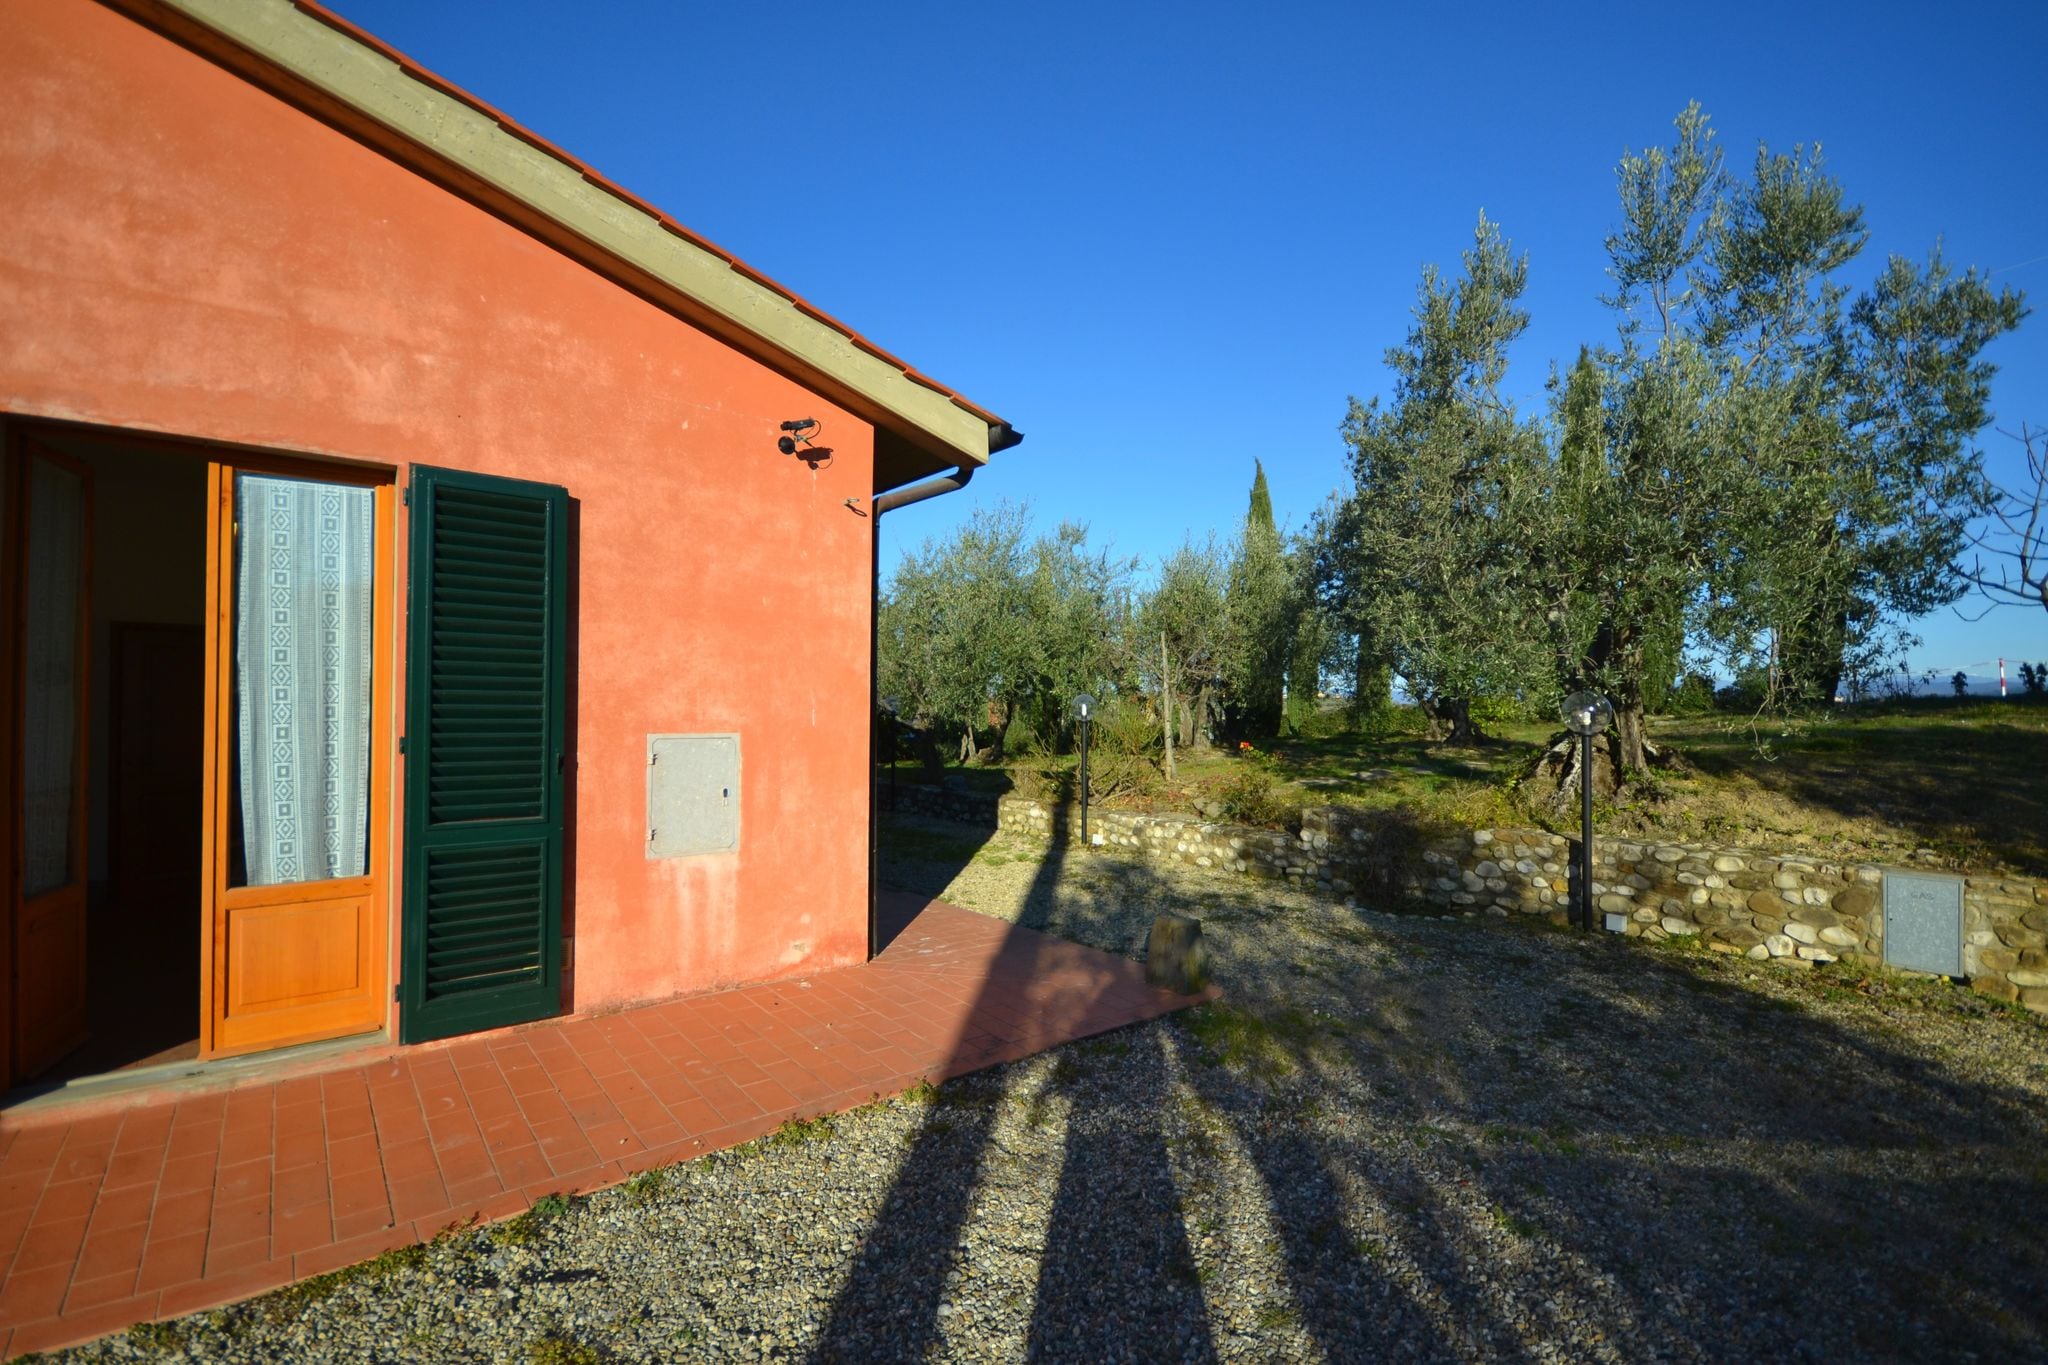 Semi-detached house in traditional agriturismo with clear view of the Chianti